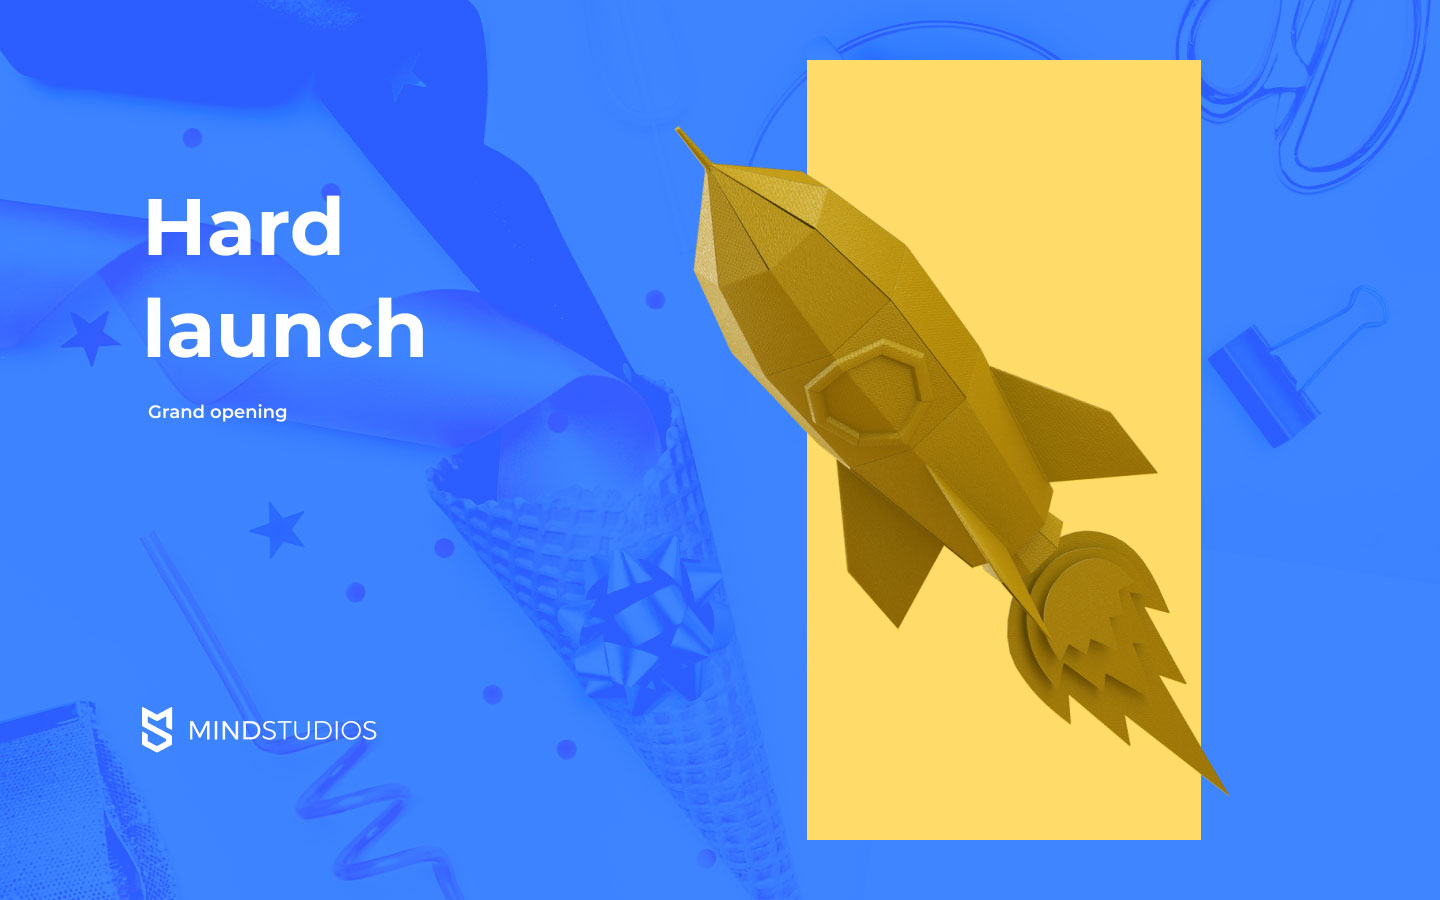 hard launch meaning